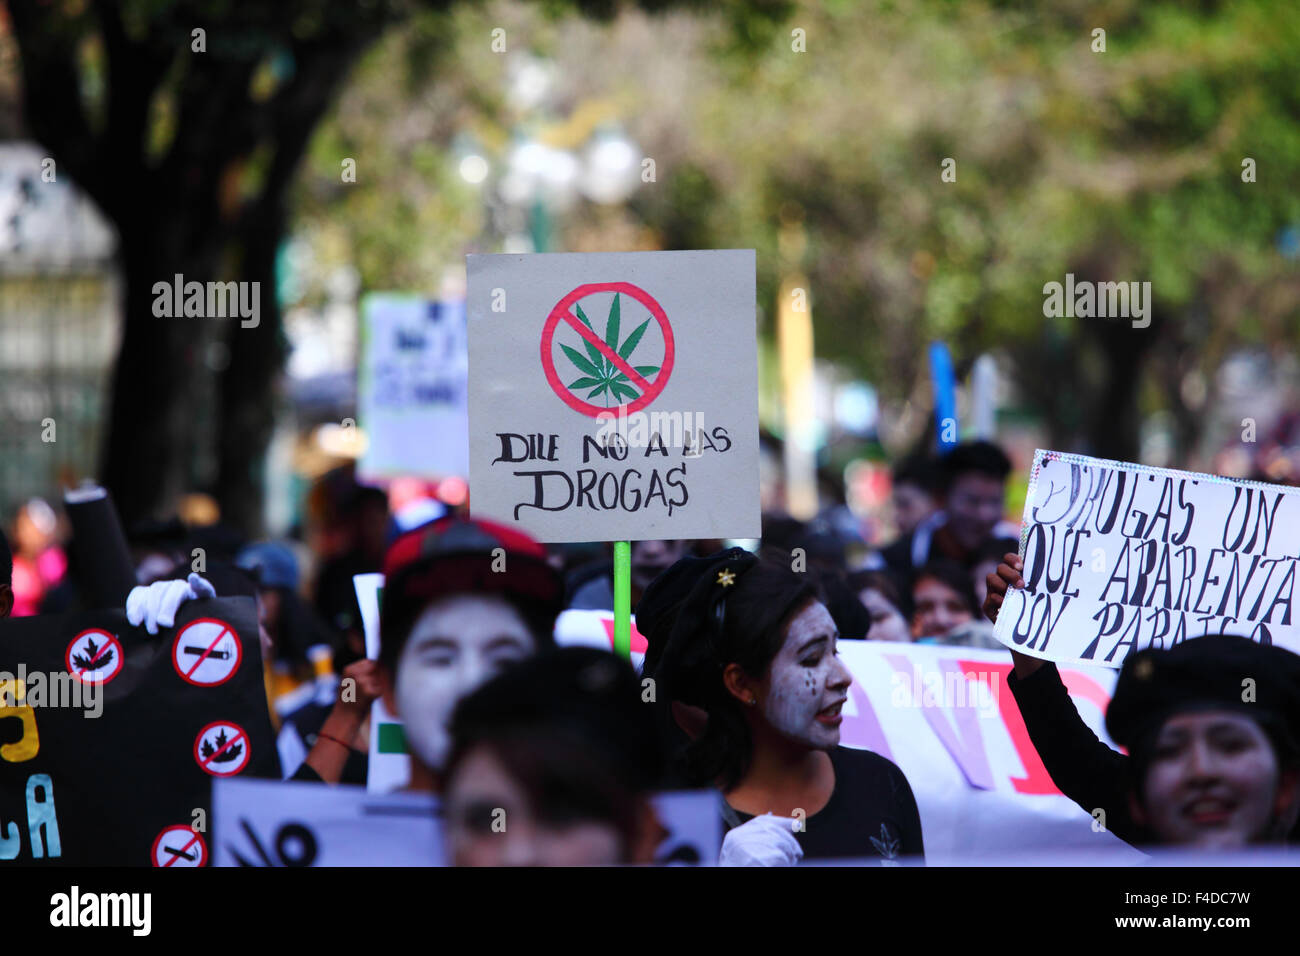 La Paz, Bolivia, 16th October 2015. A student carries a placard saying 'No to Drugs' with a crossed out cannibis leaf during a march through La Paz city centre warning of the dangers of drug use. The demonstration is organised every year by the police together with schools and colleges to educate and raise awareness about drugs and their dangers. Credit: James Brunker / Alamy Live News Stock Photo